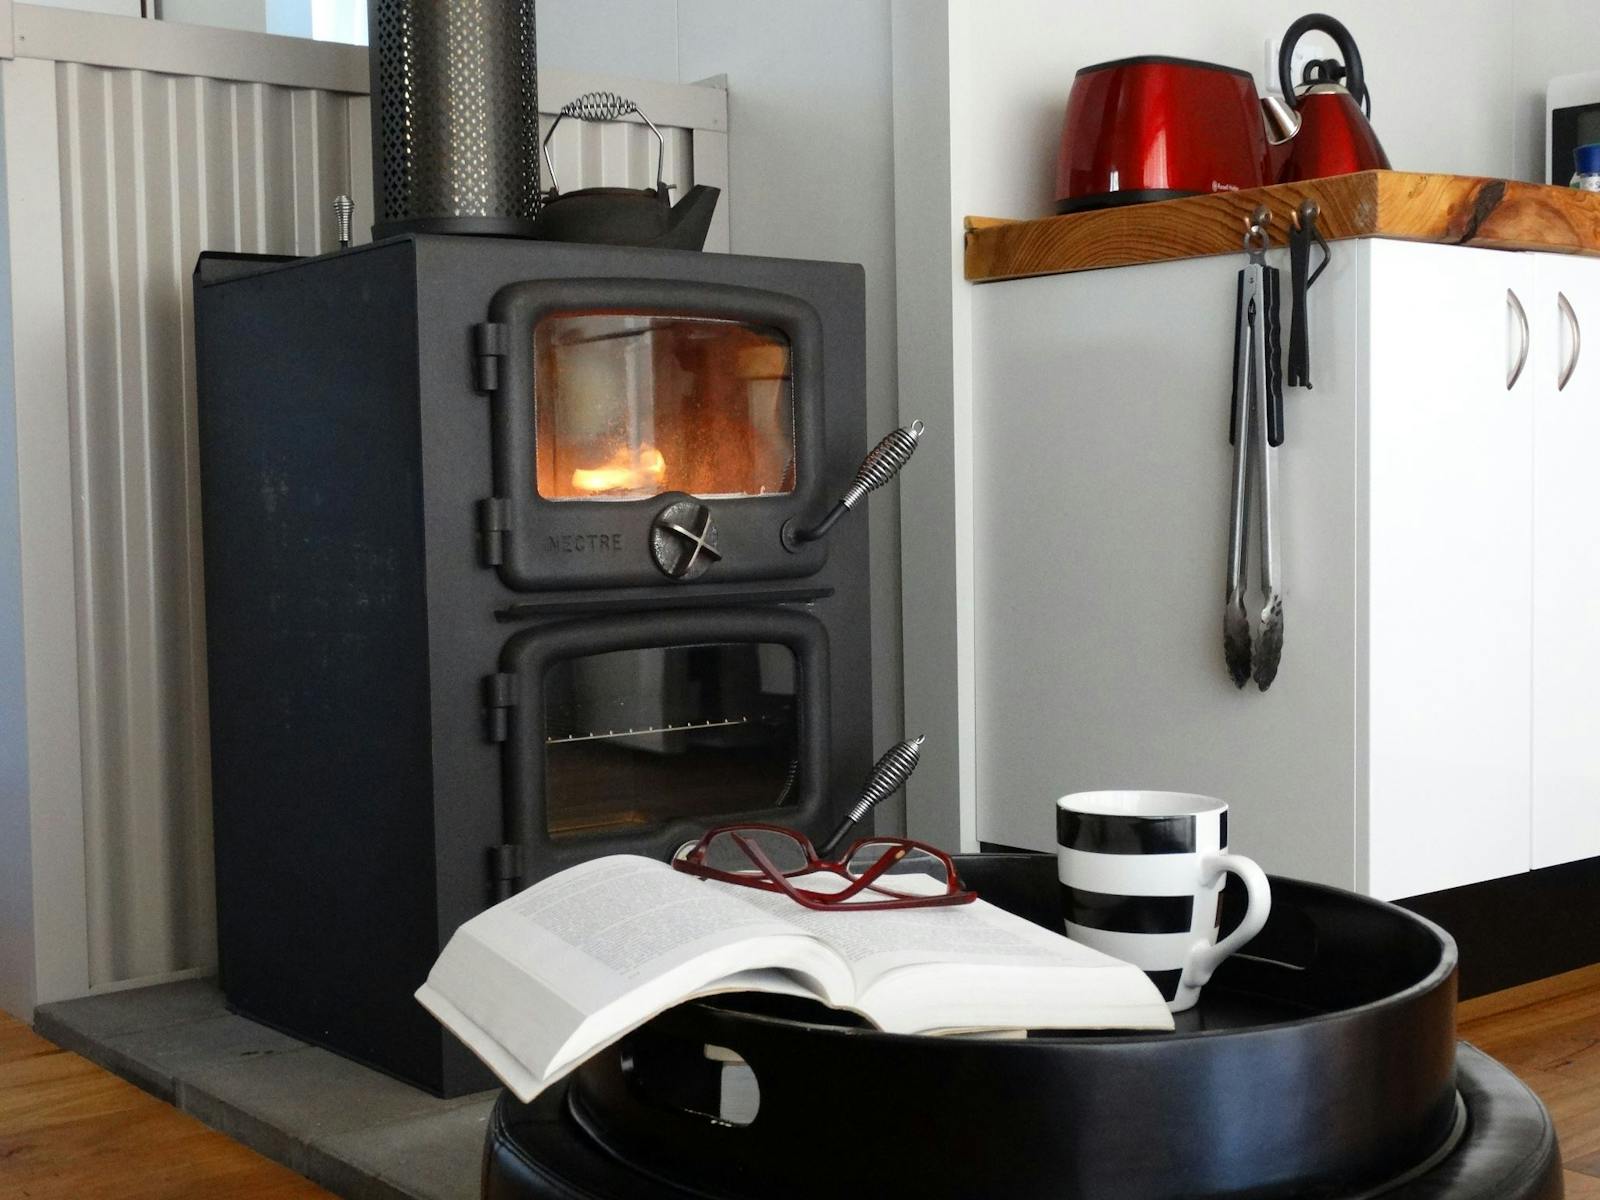 Fabulous compact wood stove for warmth & cooking; electric frypan, microwave etc also availablel